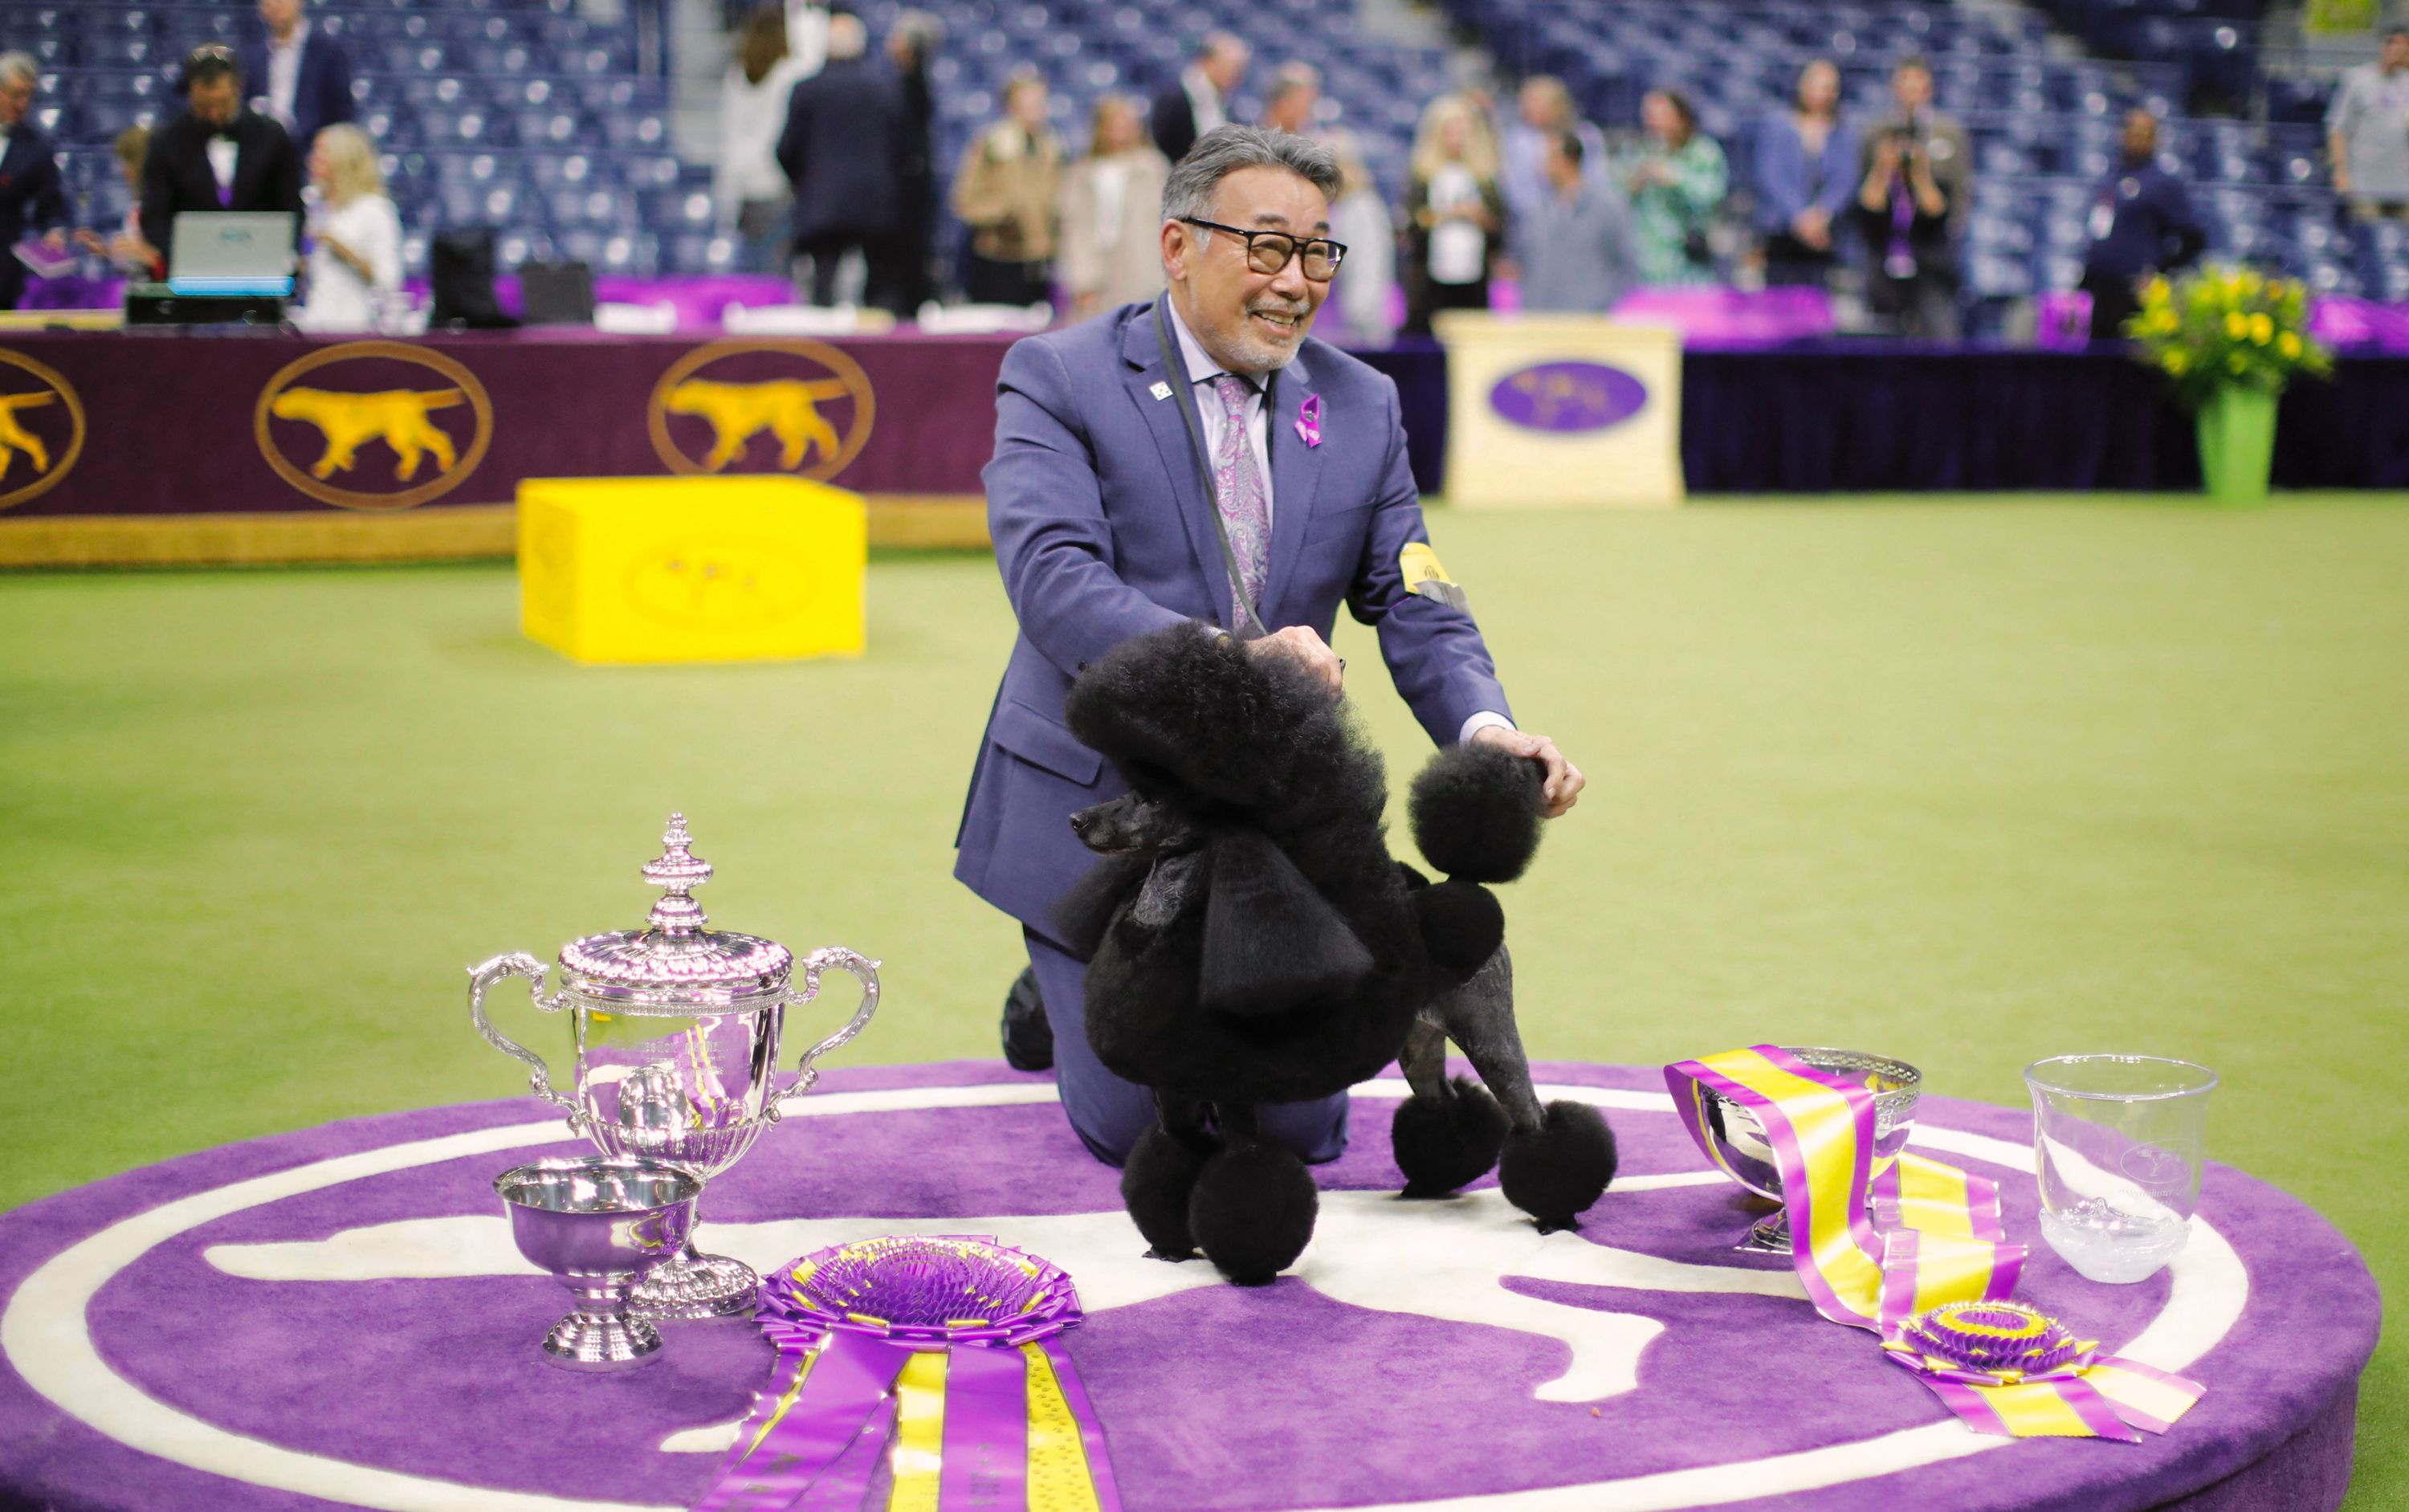 Miniature Poodle, Sage, wins the Best in Show group during the Annual Westminster Kennel Club Dog Show on Tuesday, May 14.